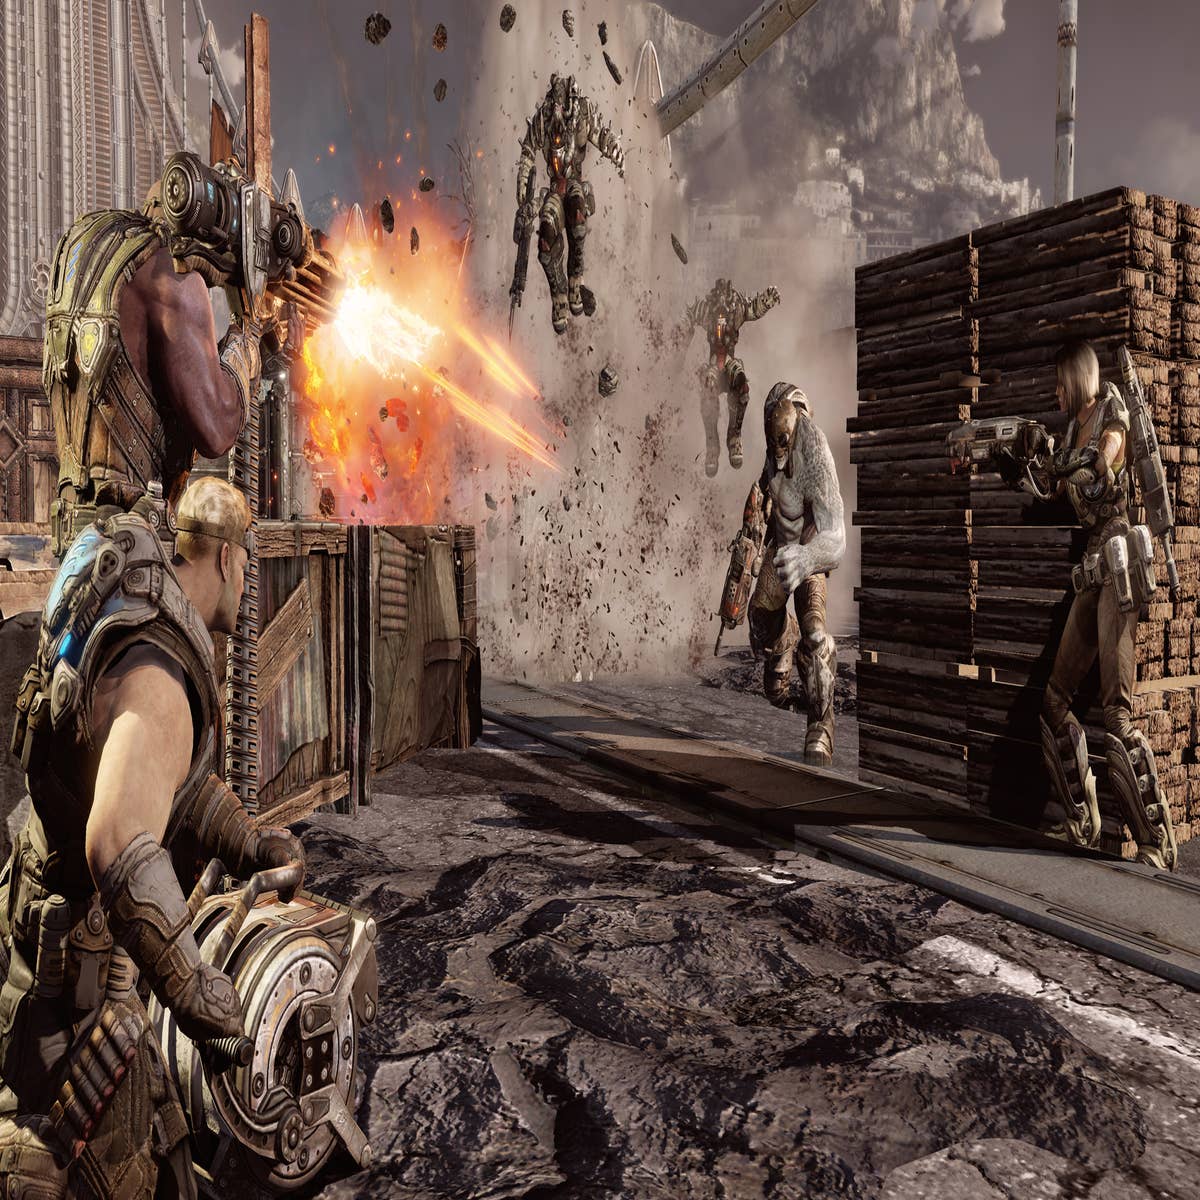 An Epic End To A Epic Trilogy – Gears Of War 3 Review